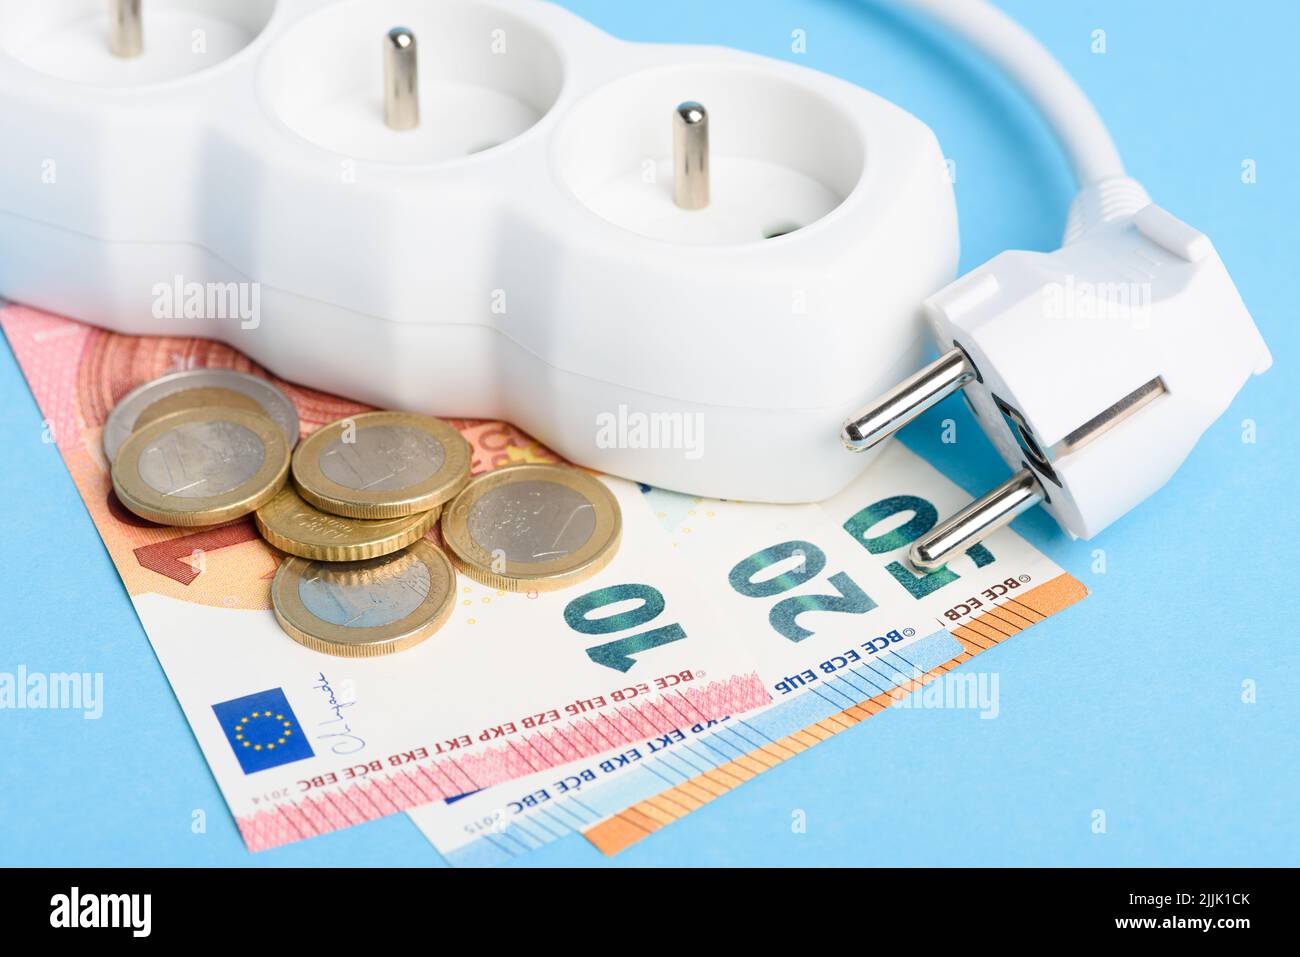 Euro bills and coins with power strip and plug on blue background. Concept of expensive electricity costs in Europe and rise in energy bill prices Stock Photo